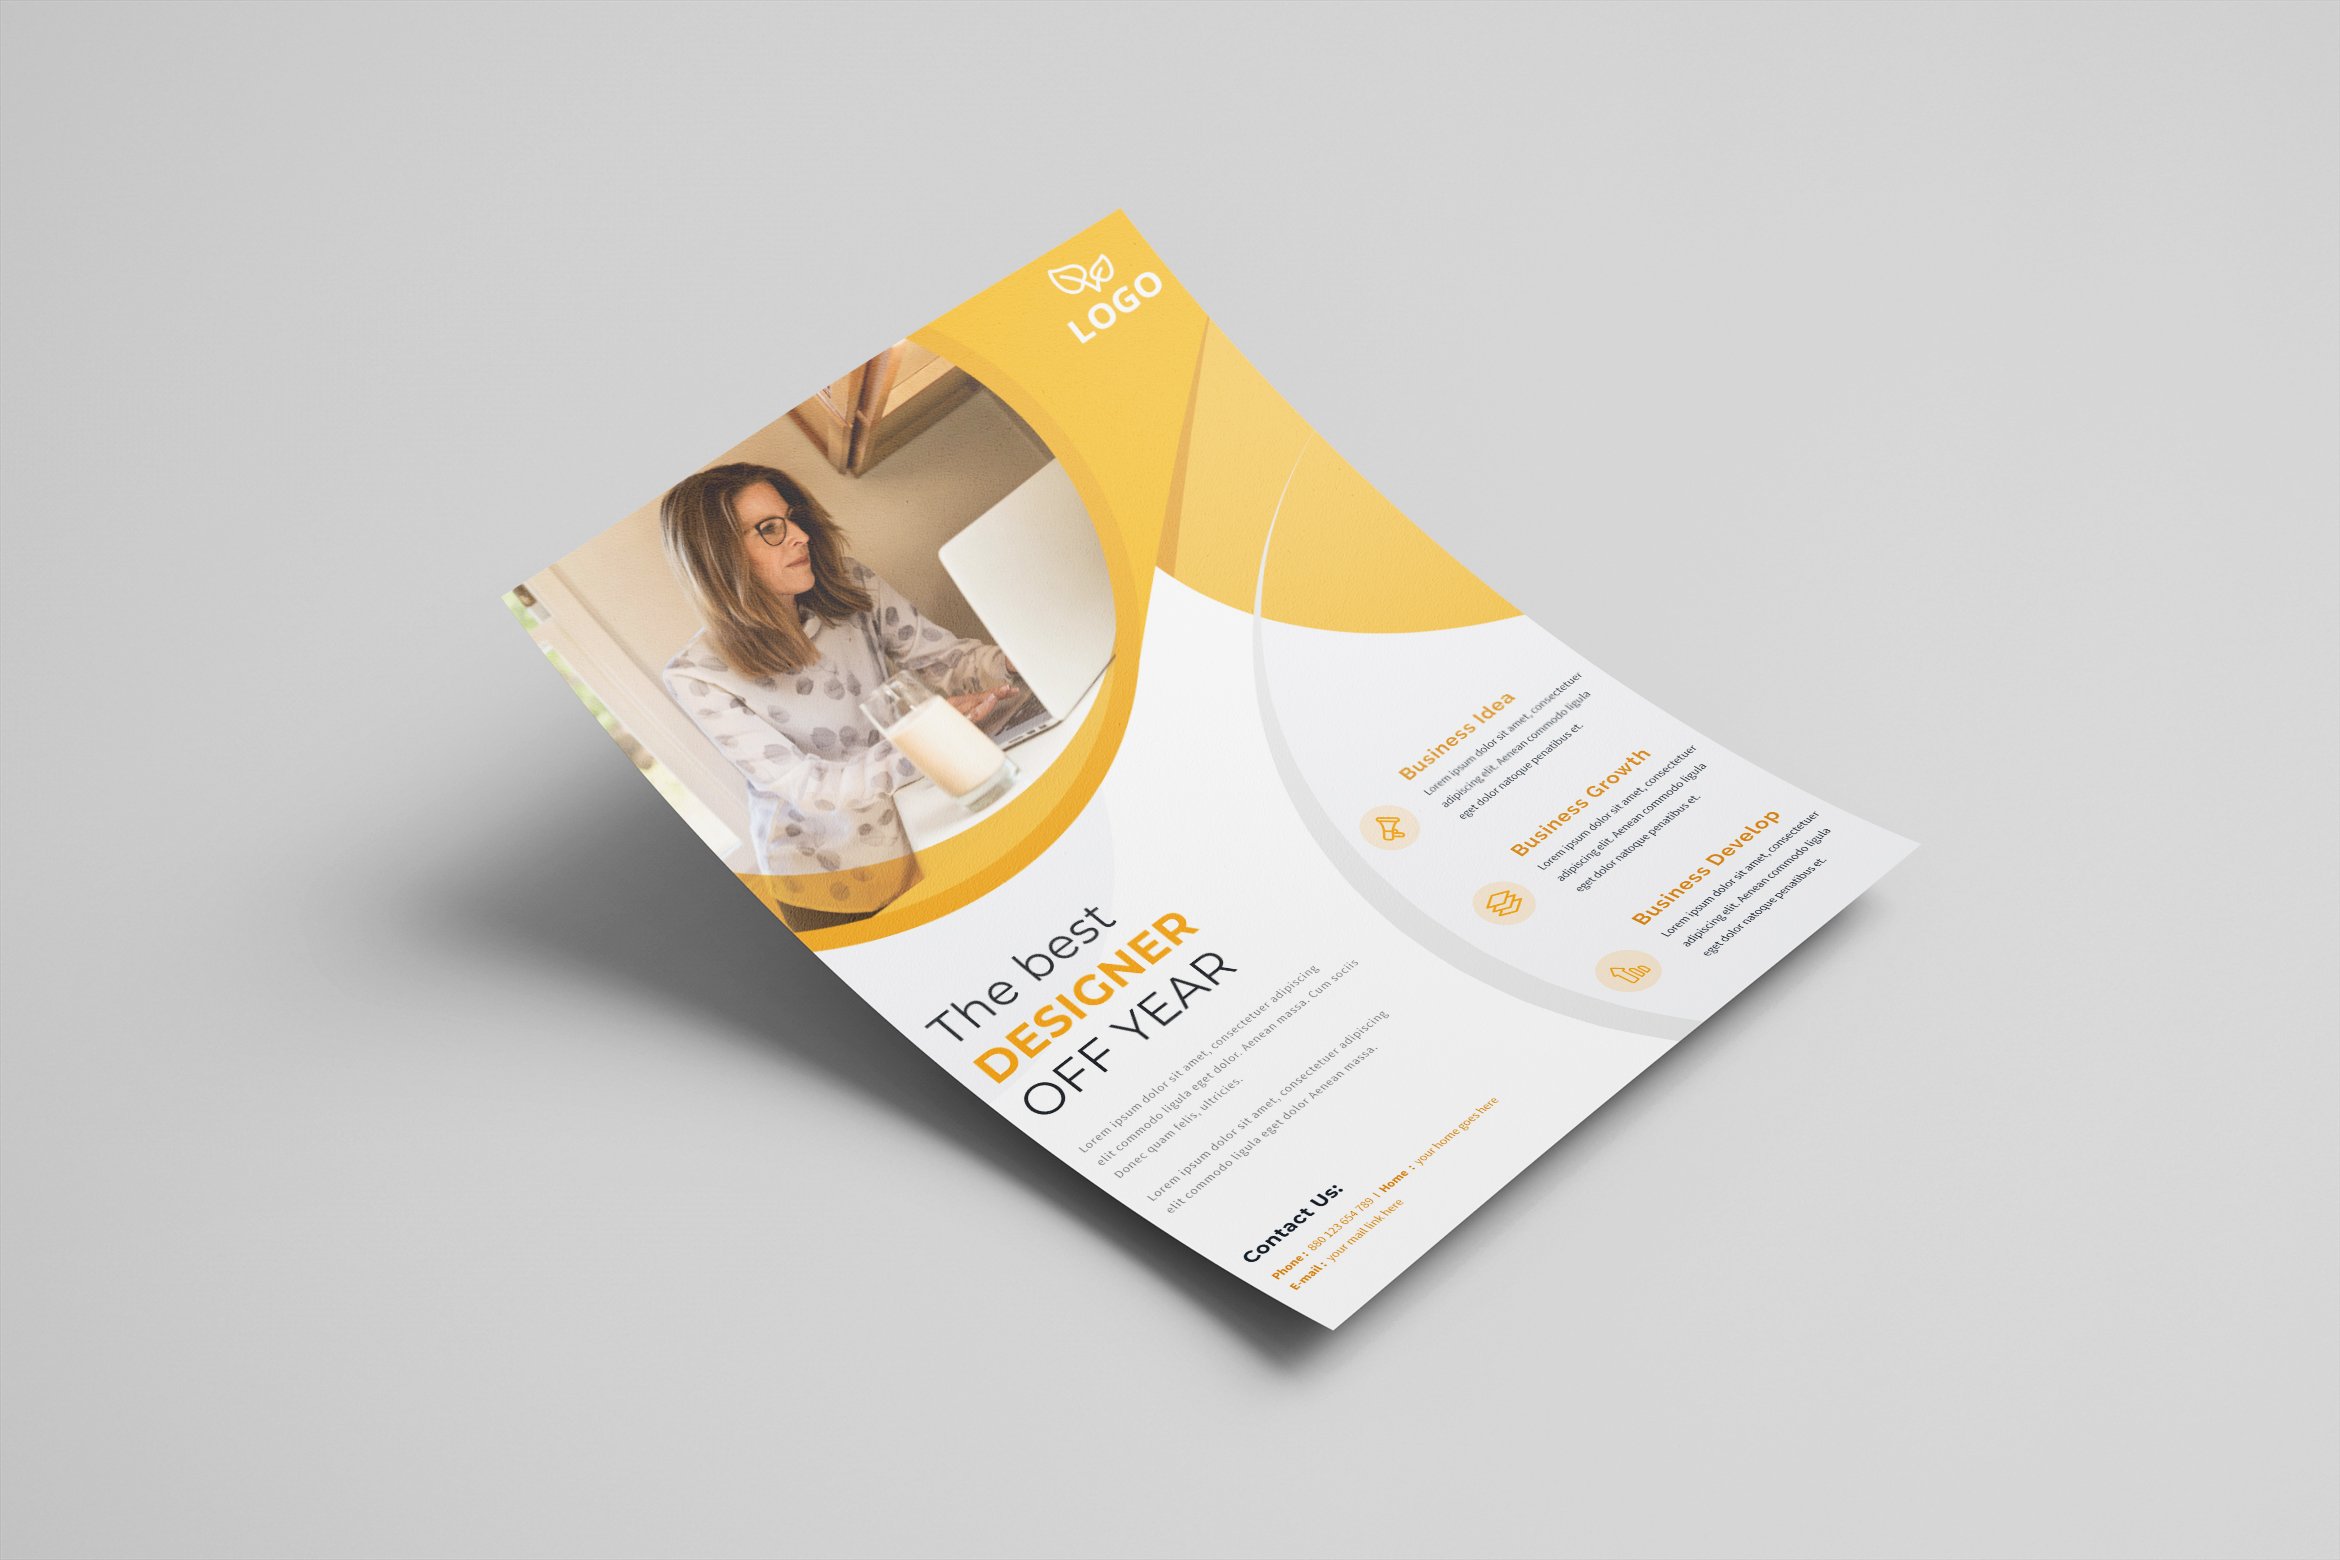 Corporate Flyer Template cover image.